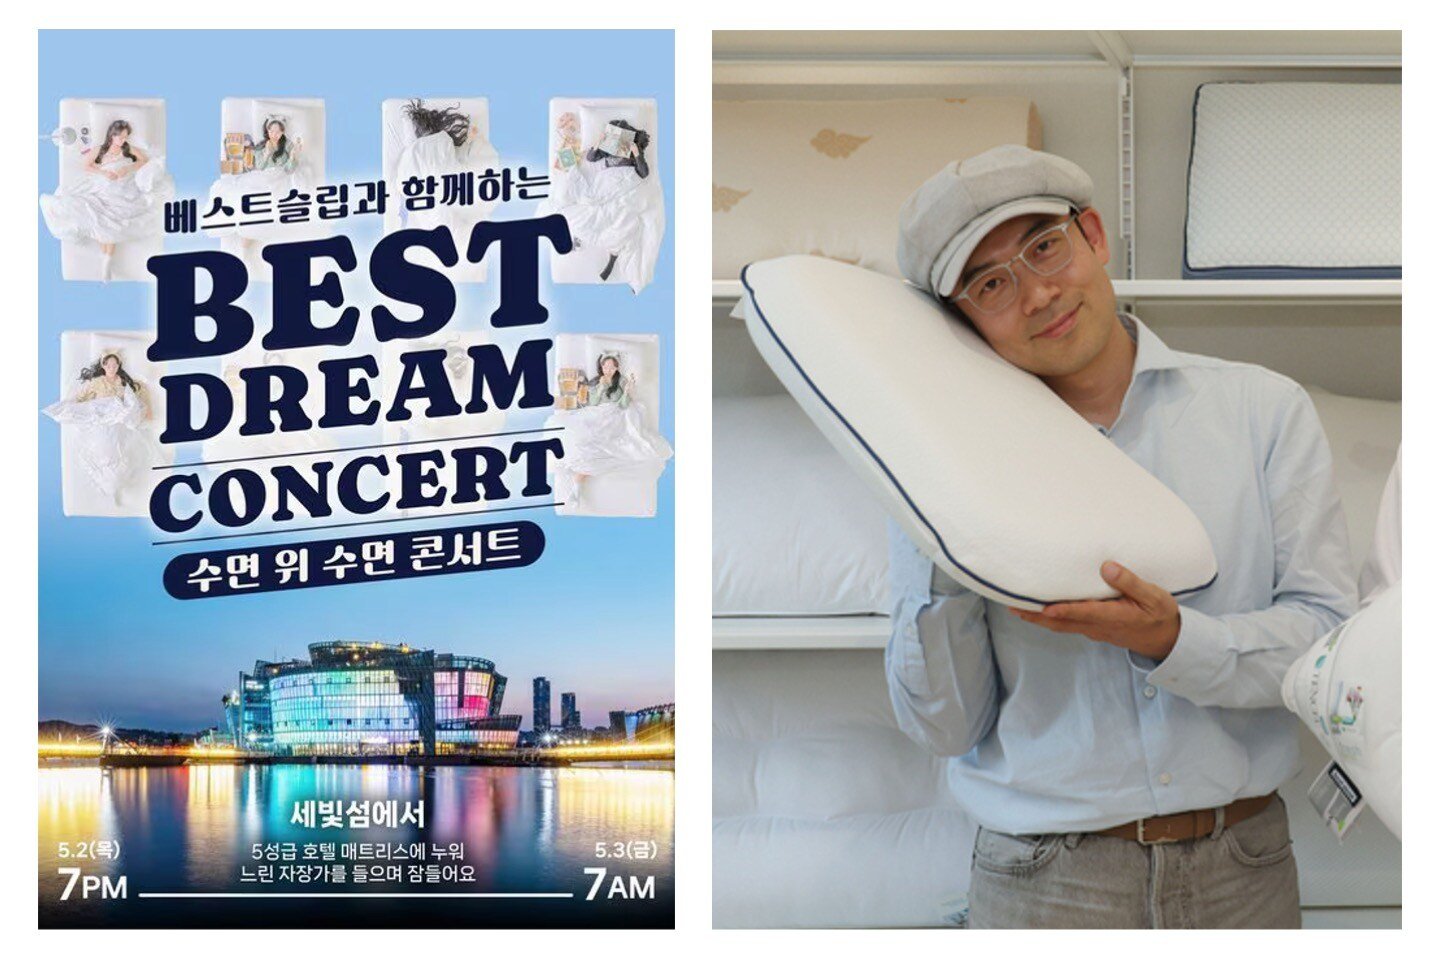 Poster announces the Best Dream Concert, and a man rests his head on a pillow 